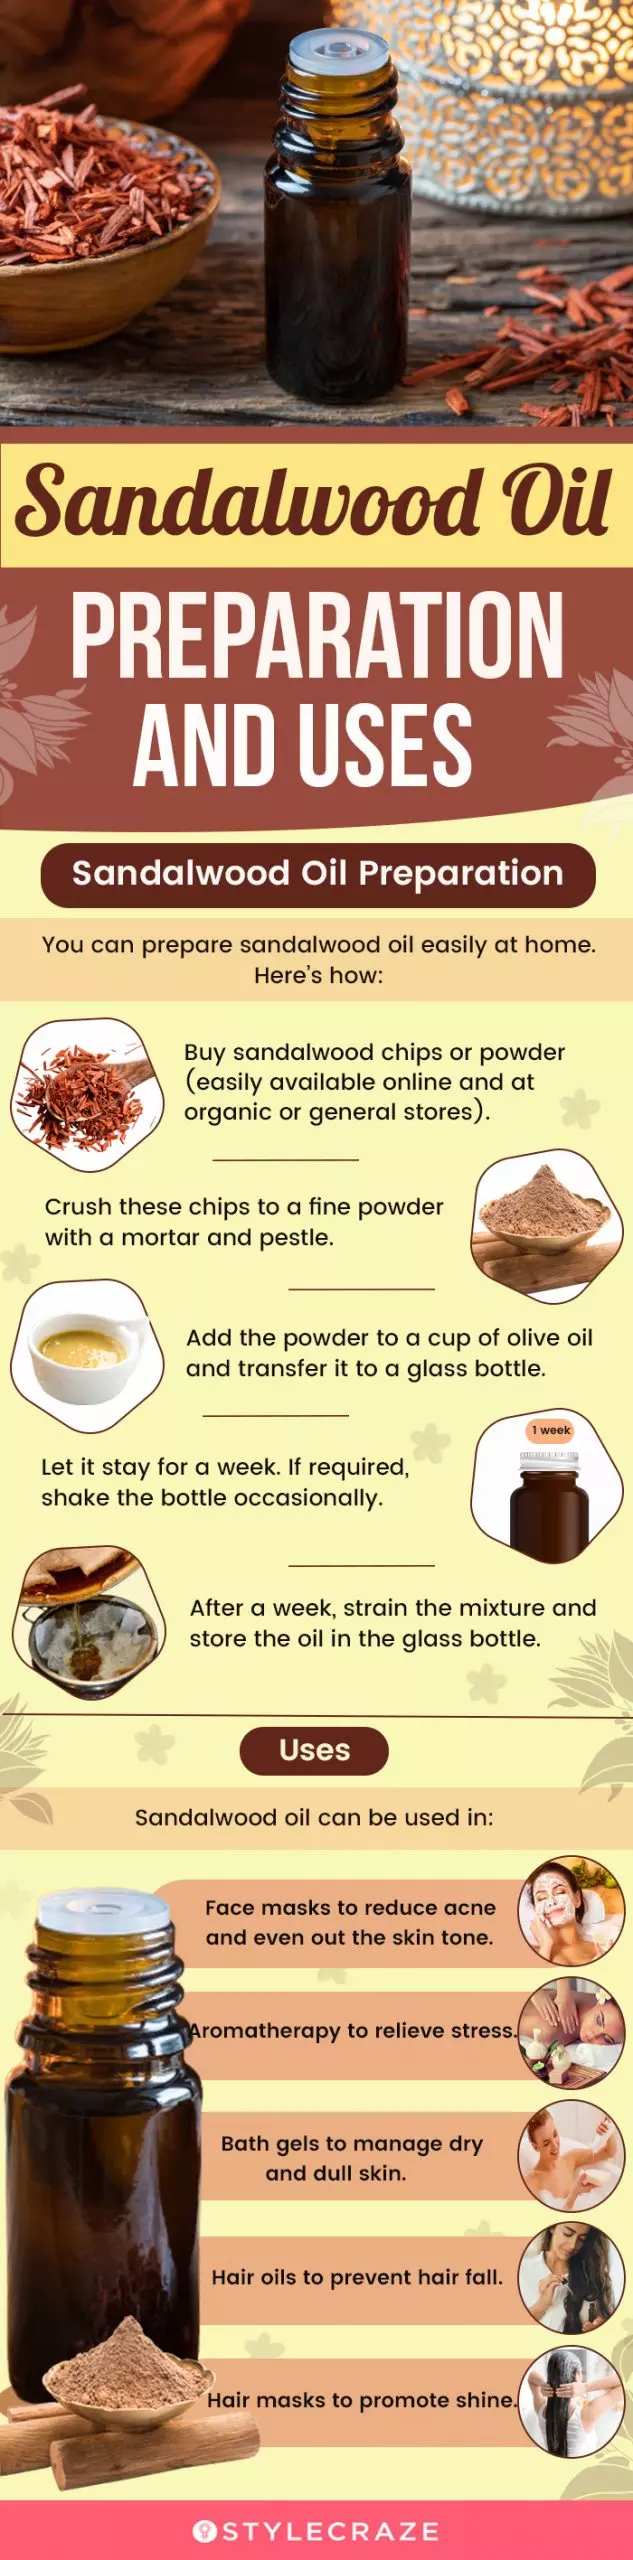 sandalwood oil preparation and uses (infographic)